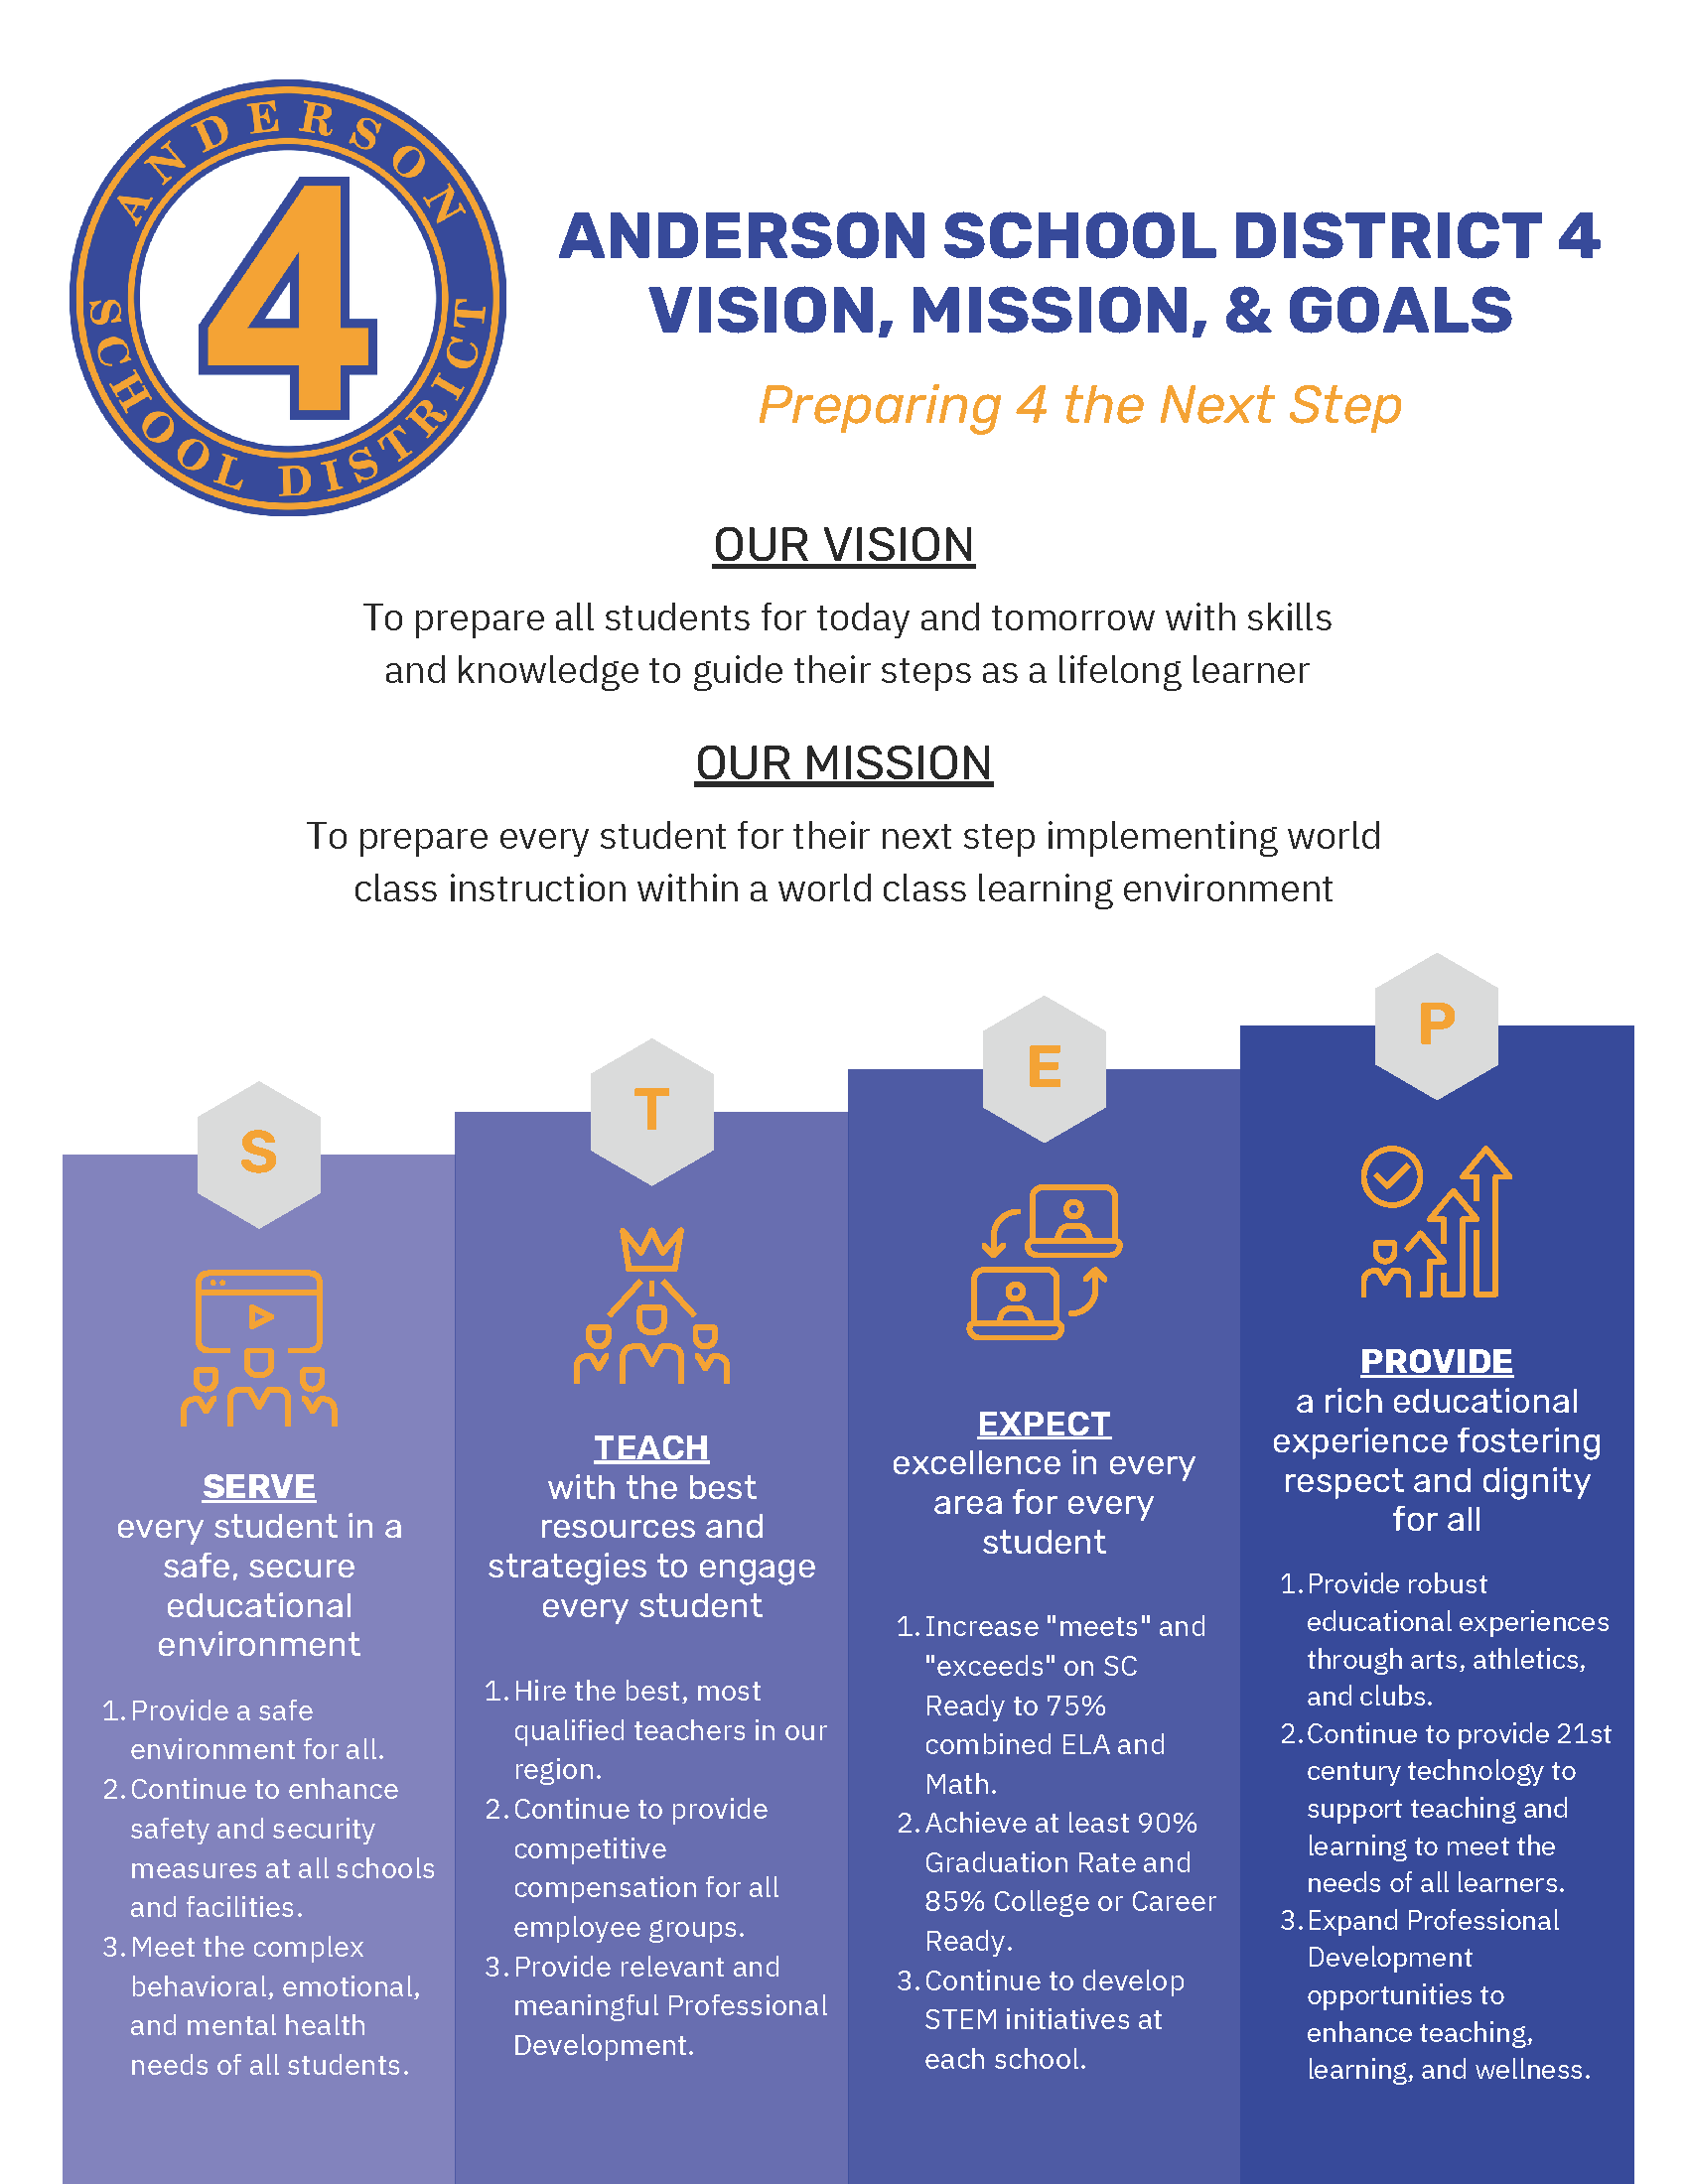 ASD4 Mission and Vision